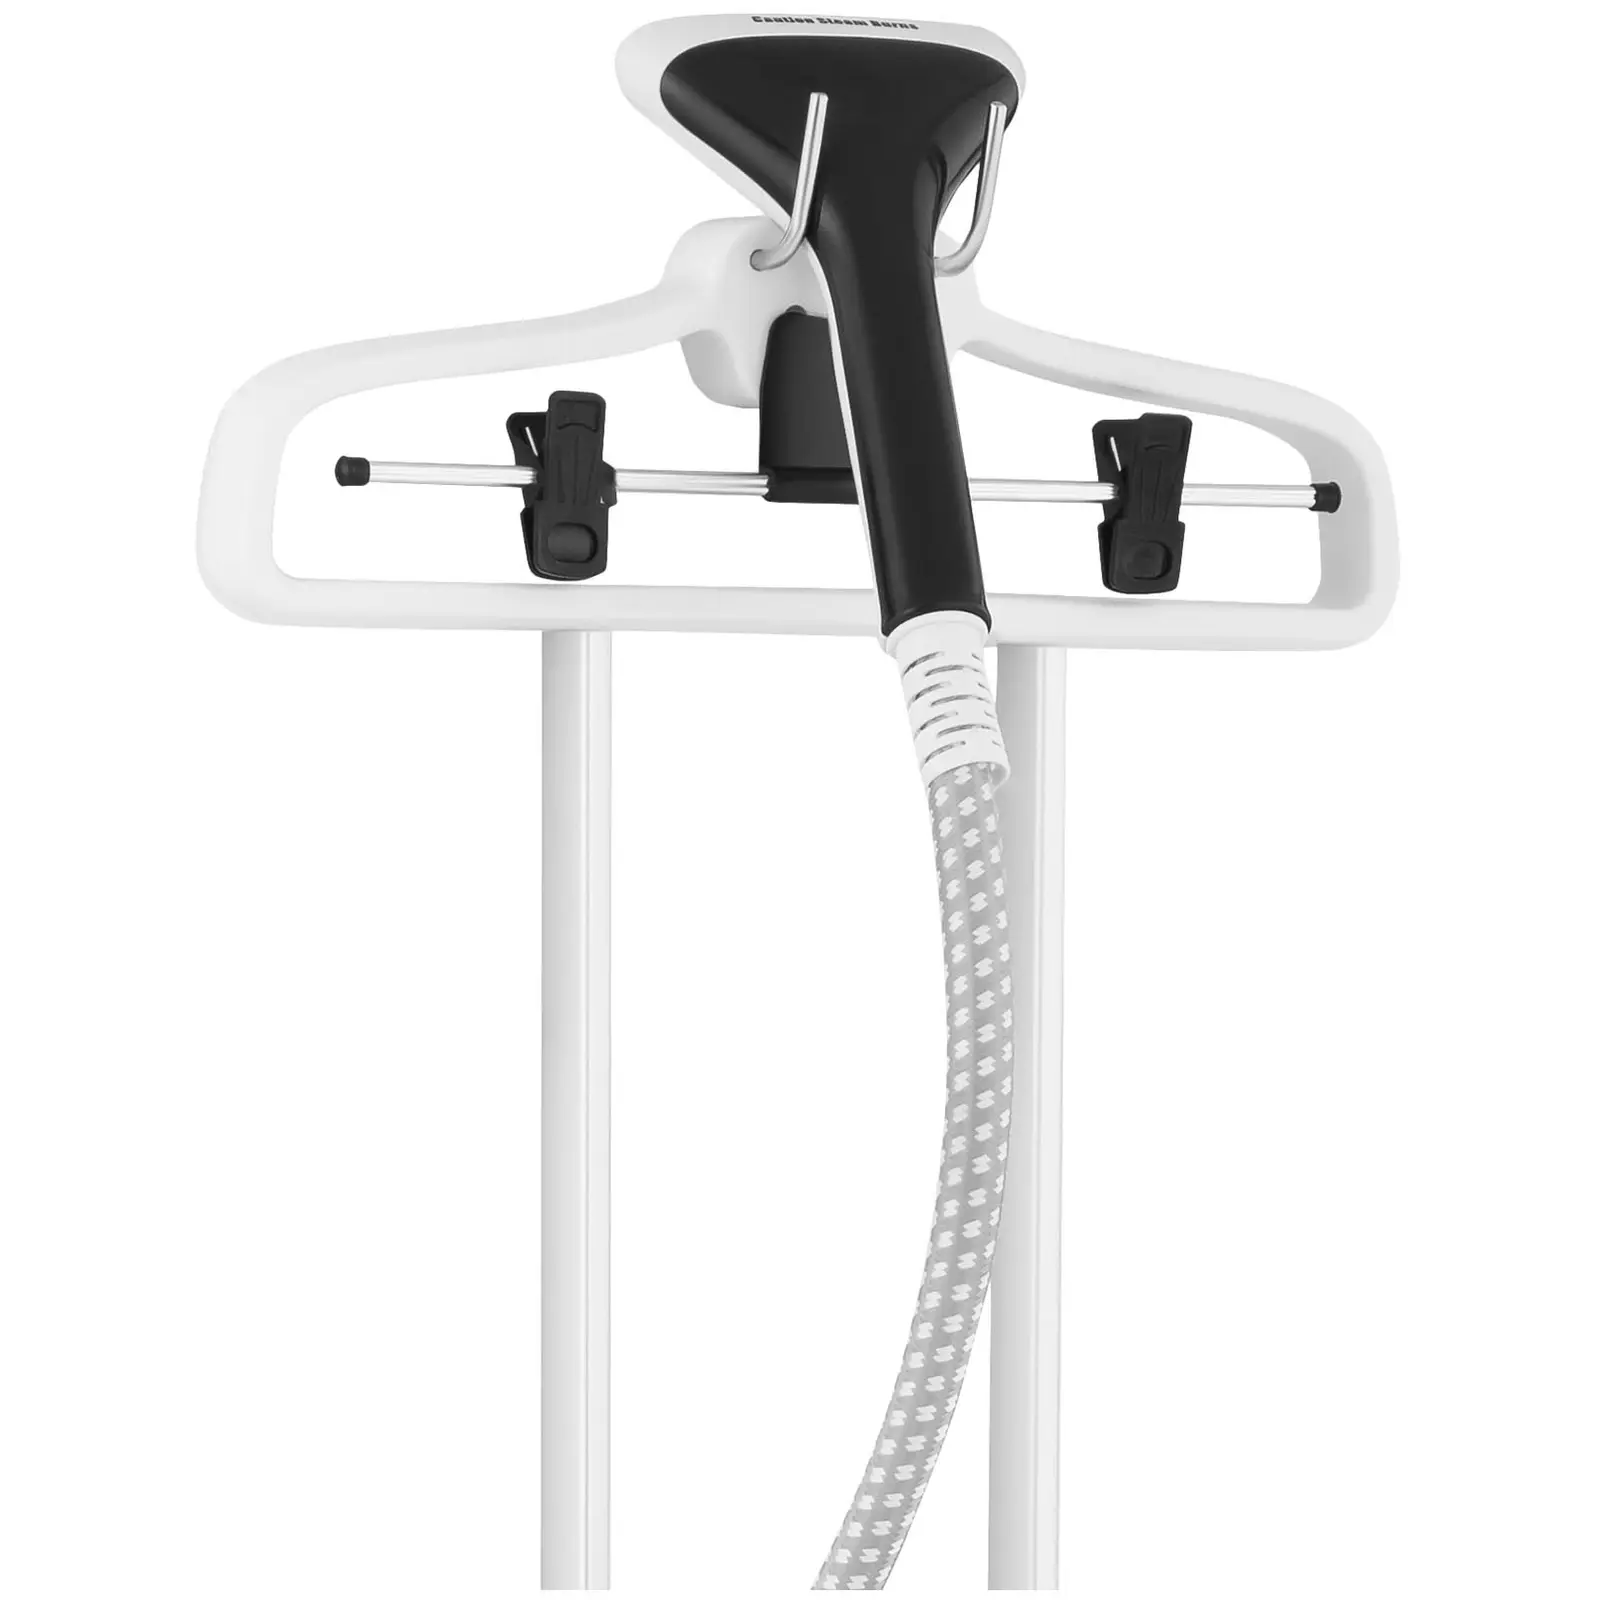 Commercial Clothes Steamer - 2 Stages - 1.800 W - 55 min